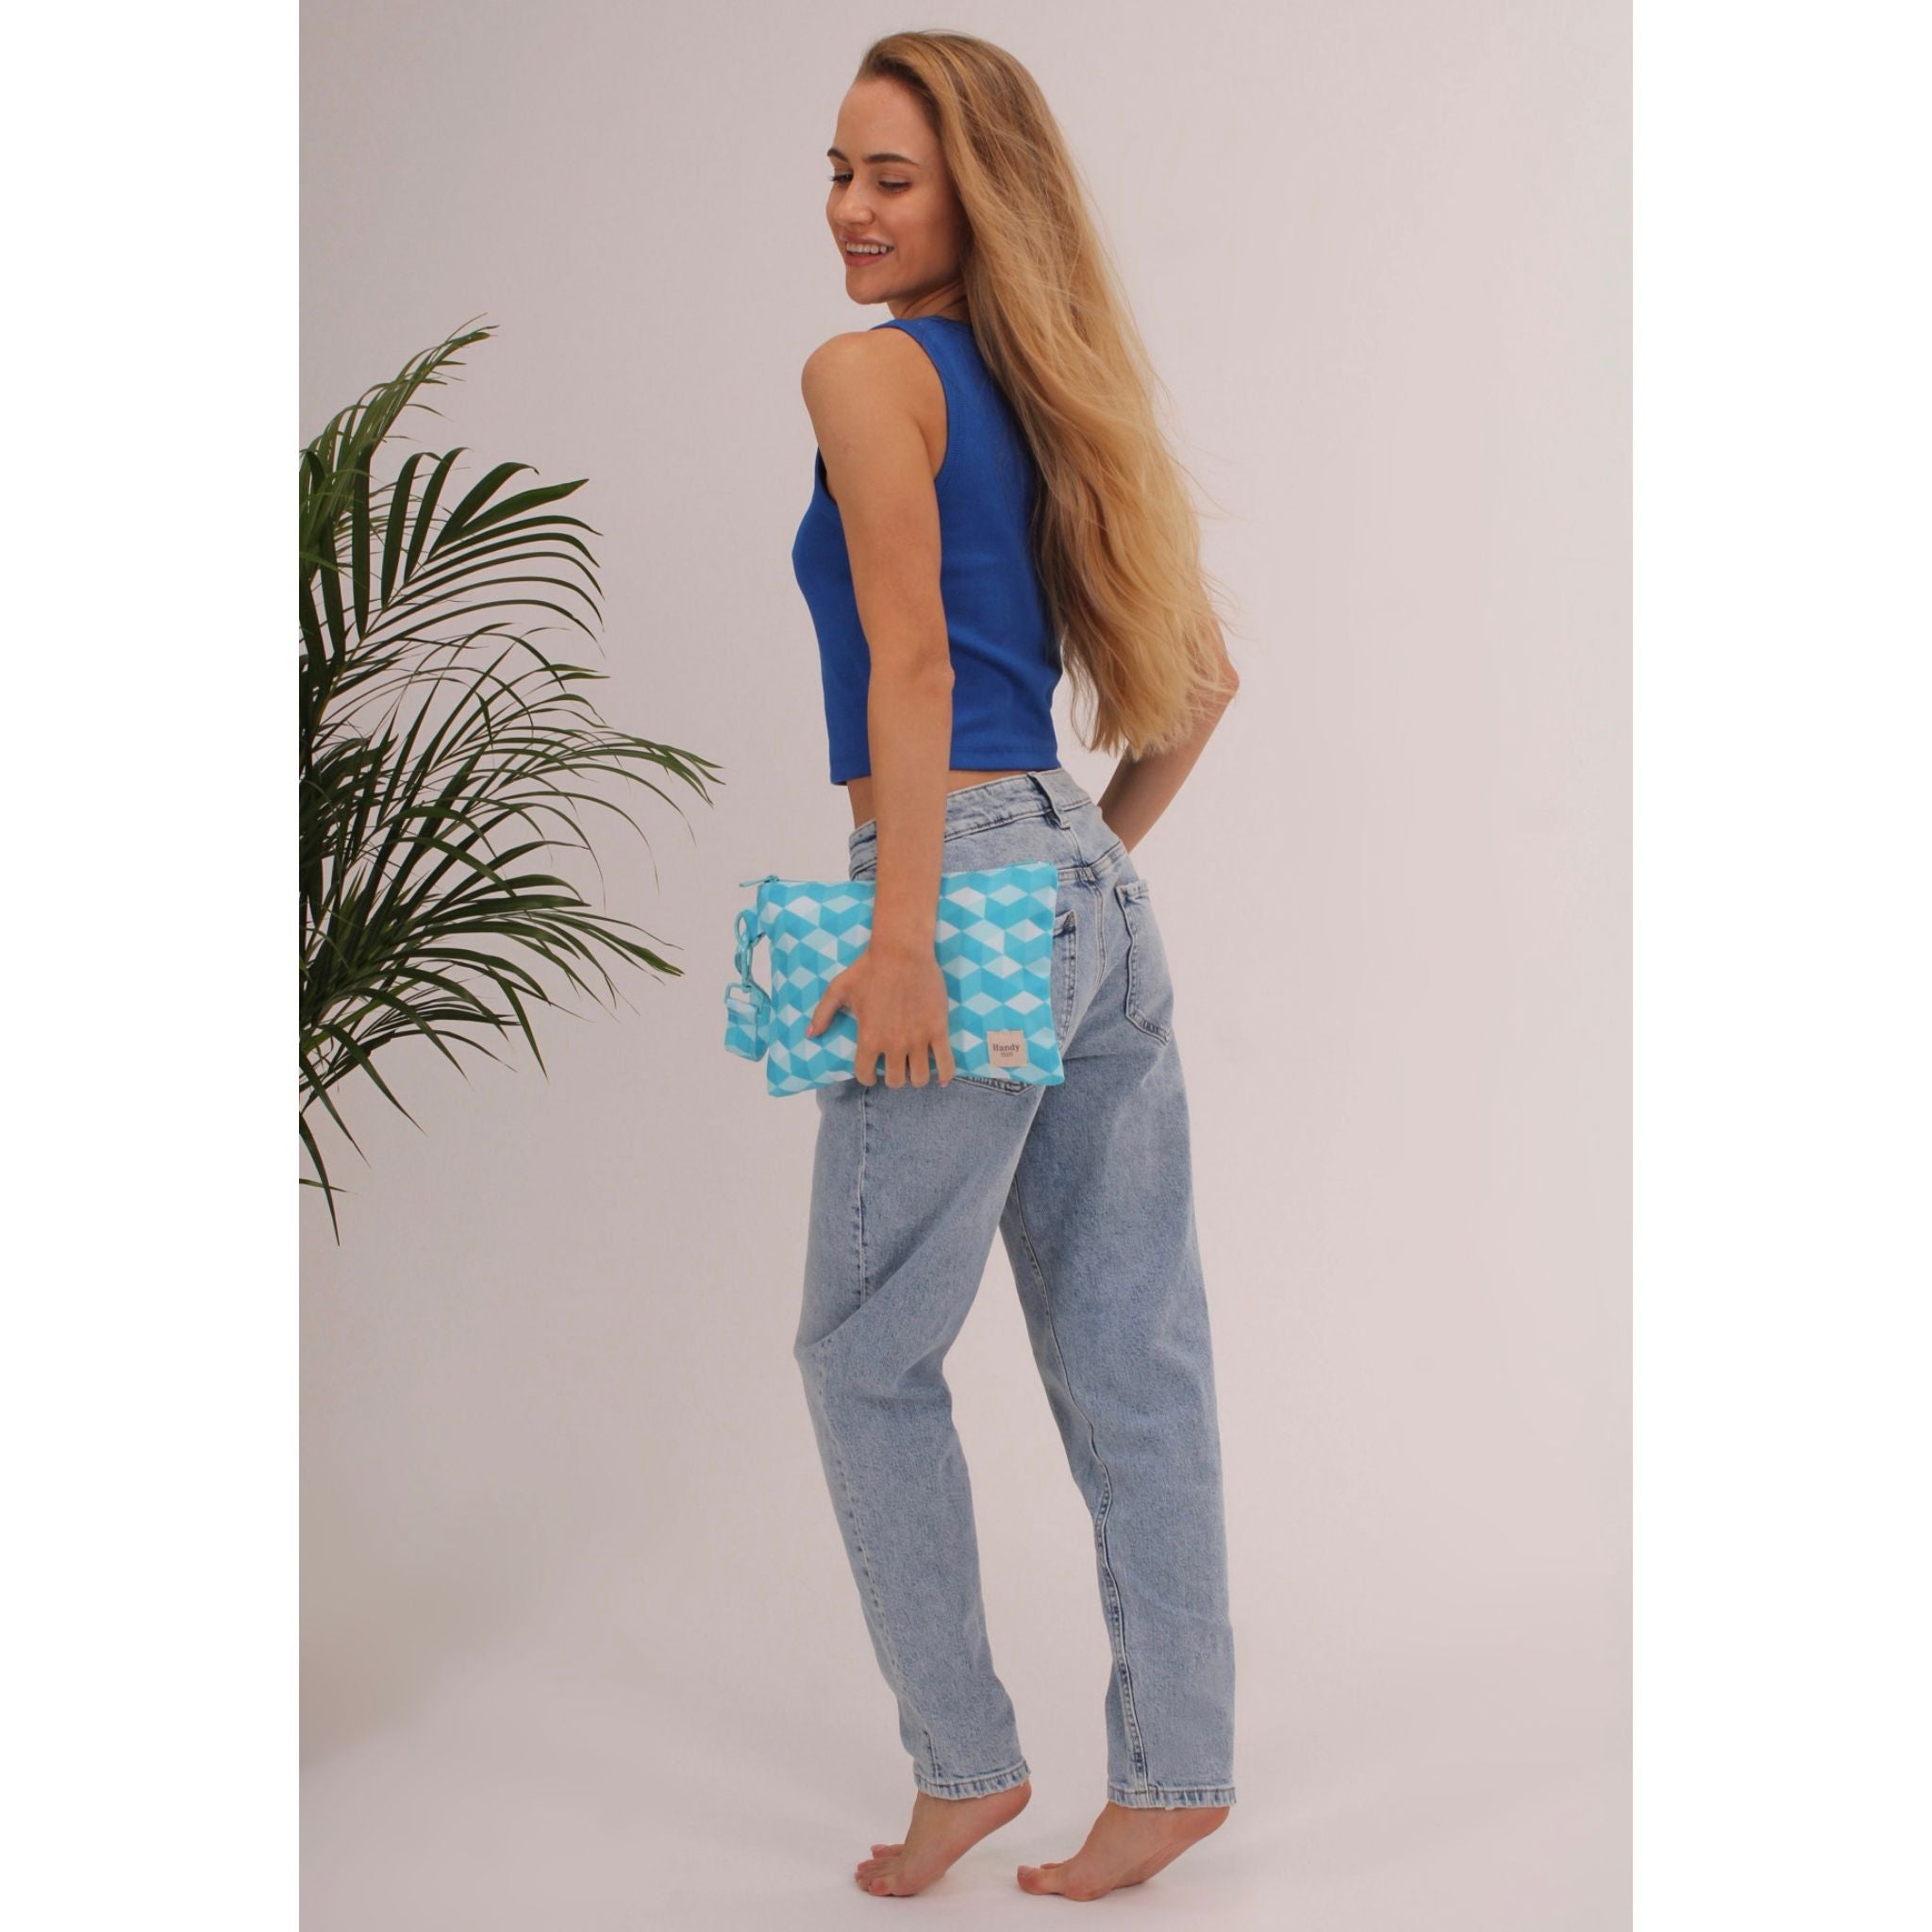 SEA MOSAIQUE - POUCH WITH WRISTLET BUCKLE - Handy Beach GoodsSEA MOSAIQUE - POUCH WITH WRISTLET BUCKLE